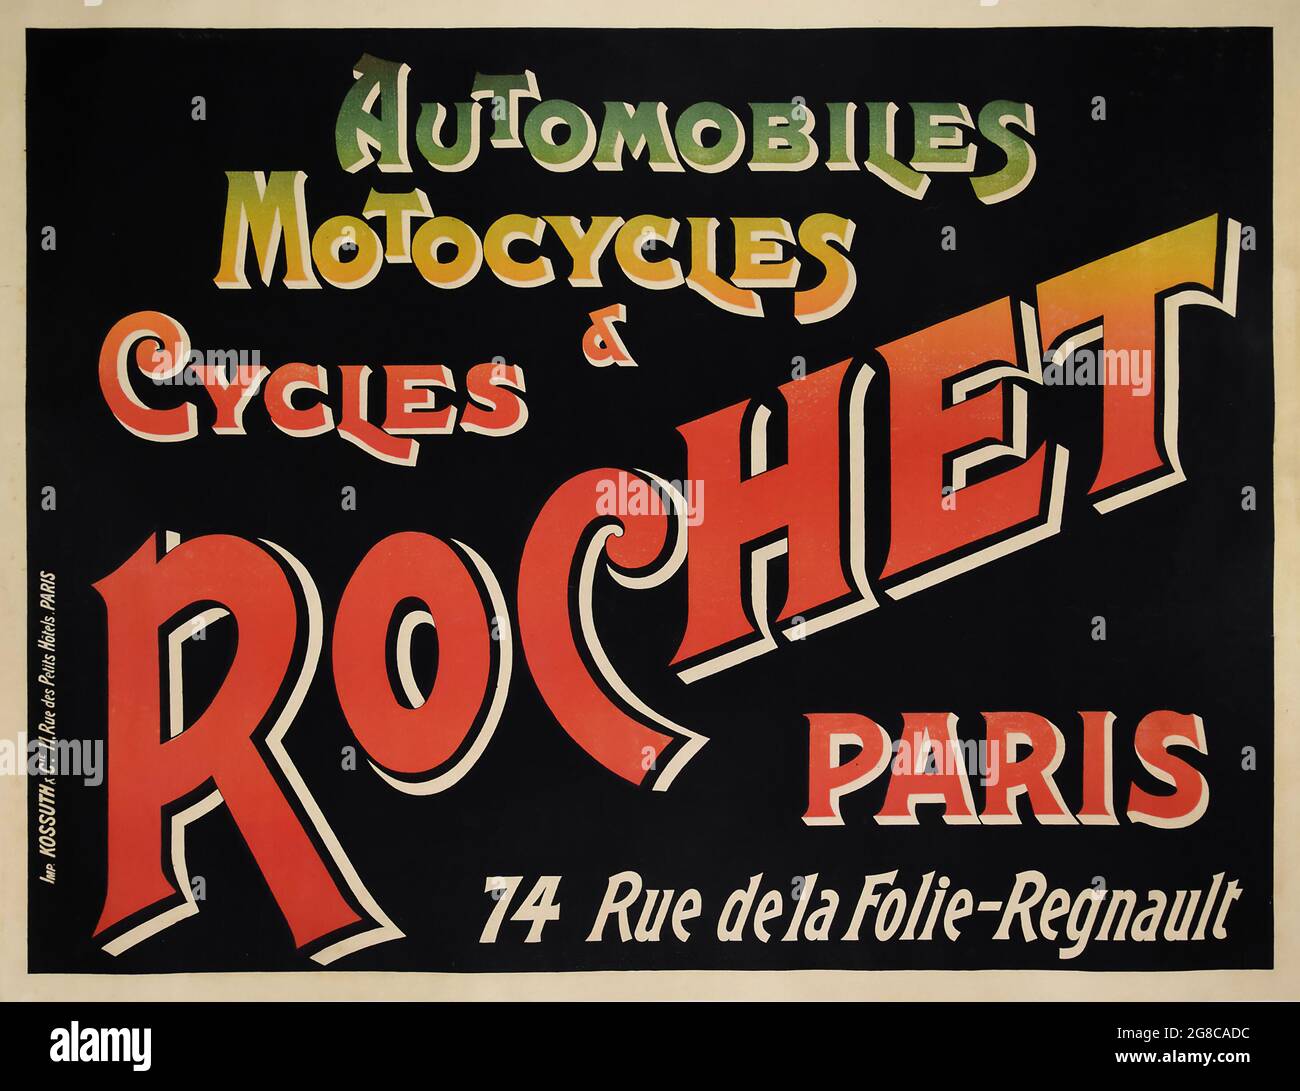 Automobiles, Motocycles & Cycles ROCHET Paris, classic and vintage sign / poster. Circa 1890. Stock Photo